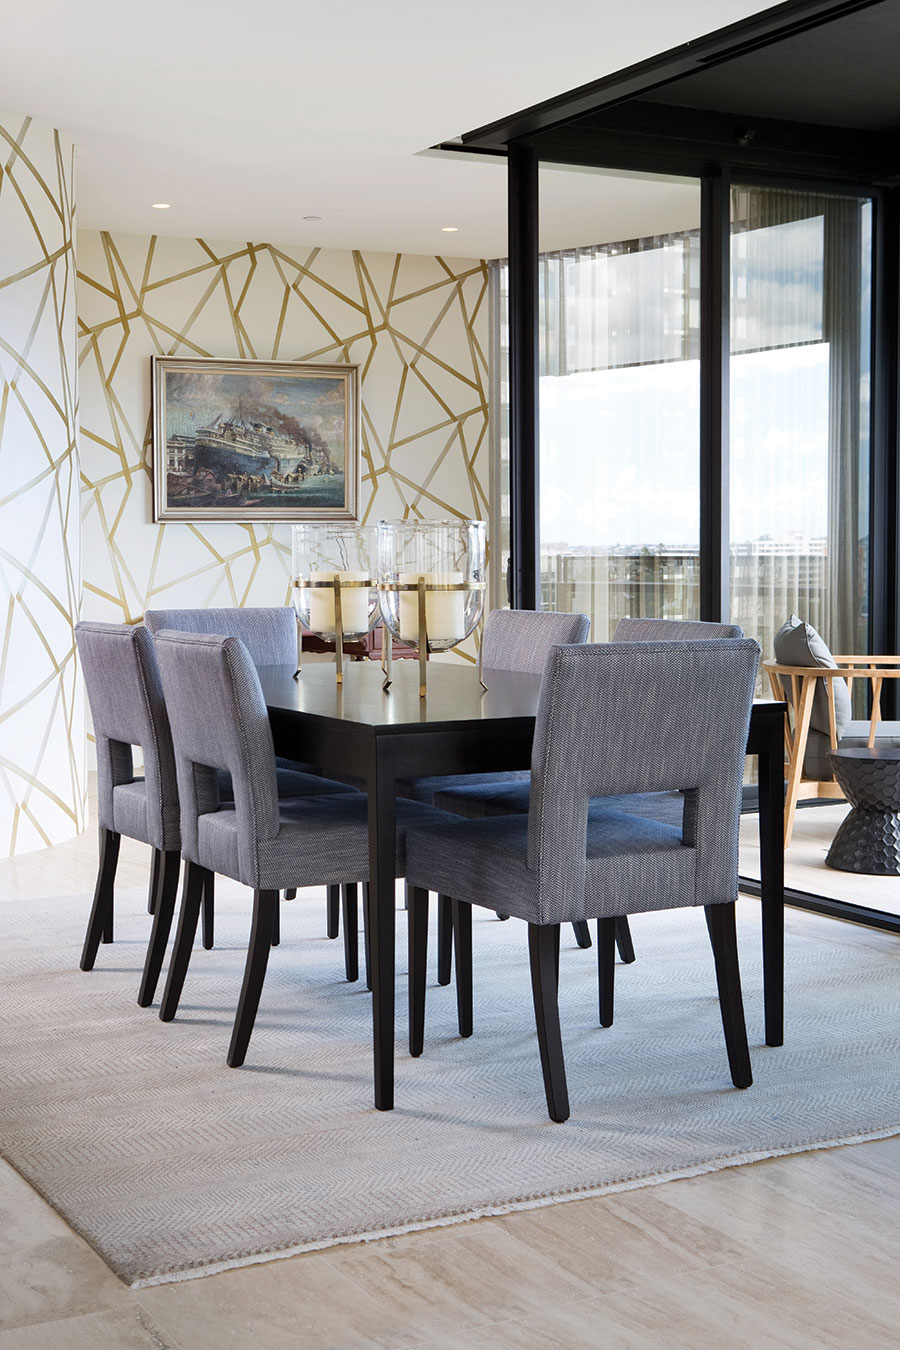 Queensland hoems Palm Interiors apartment dining